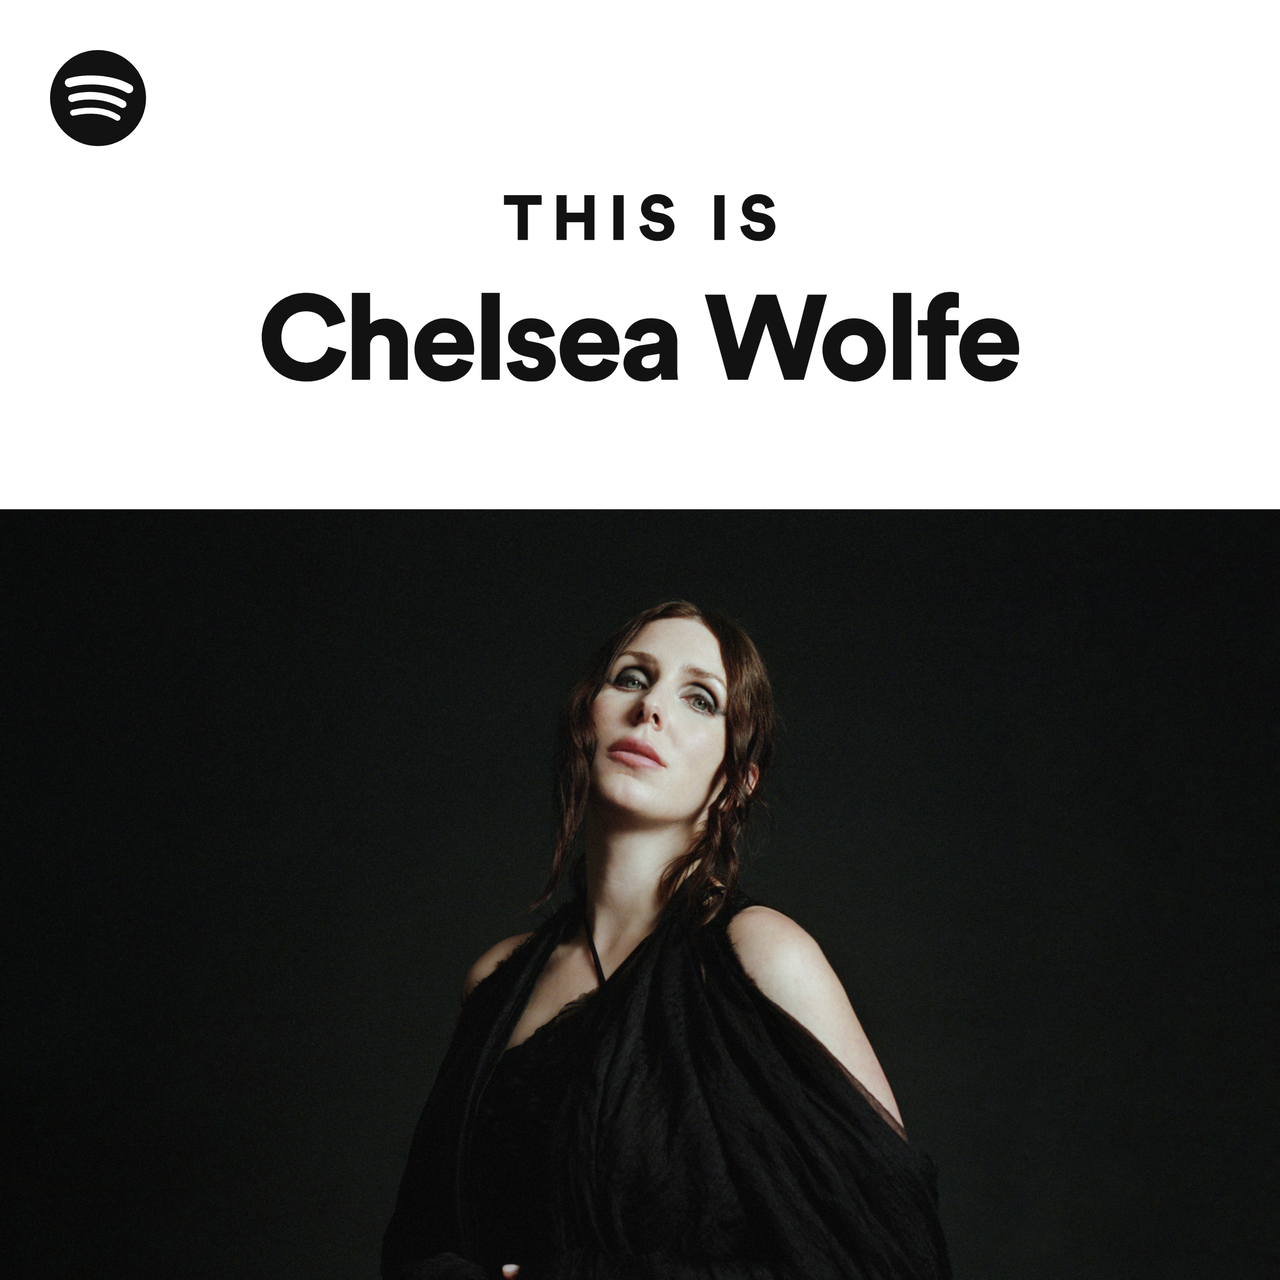 This Is Chelsea Wolfe